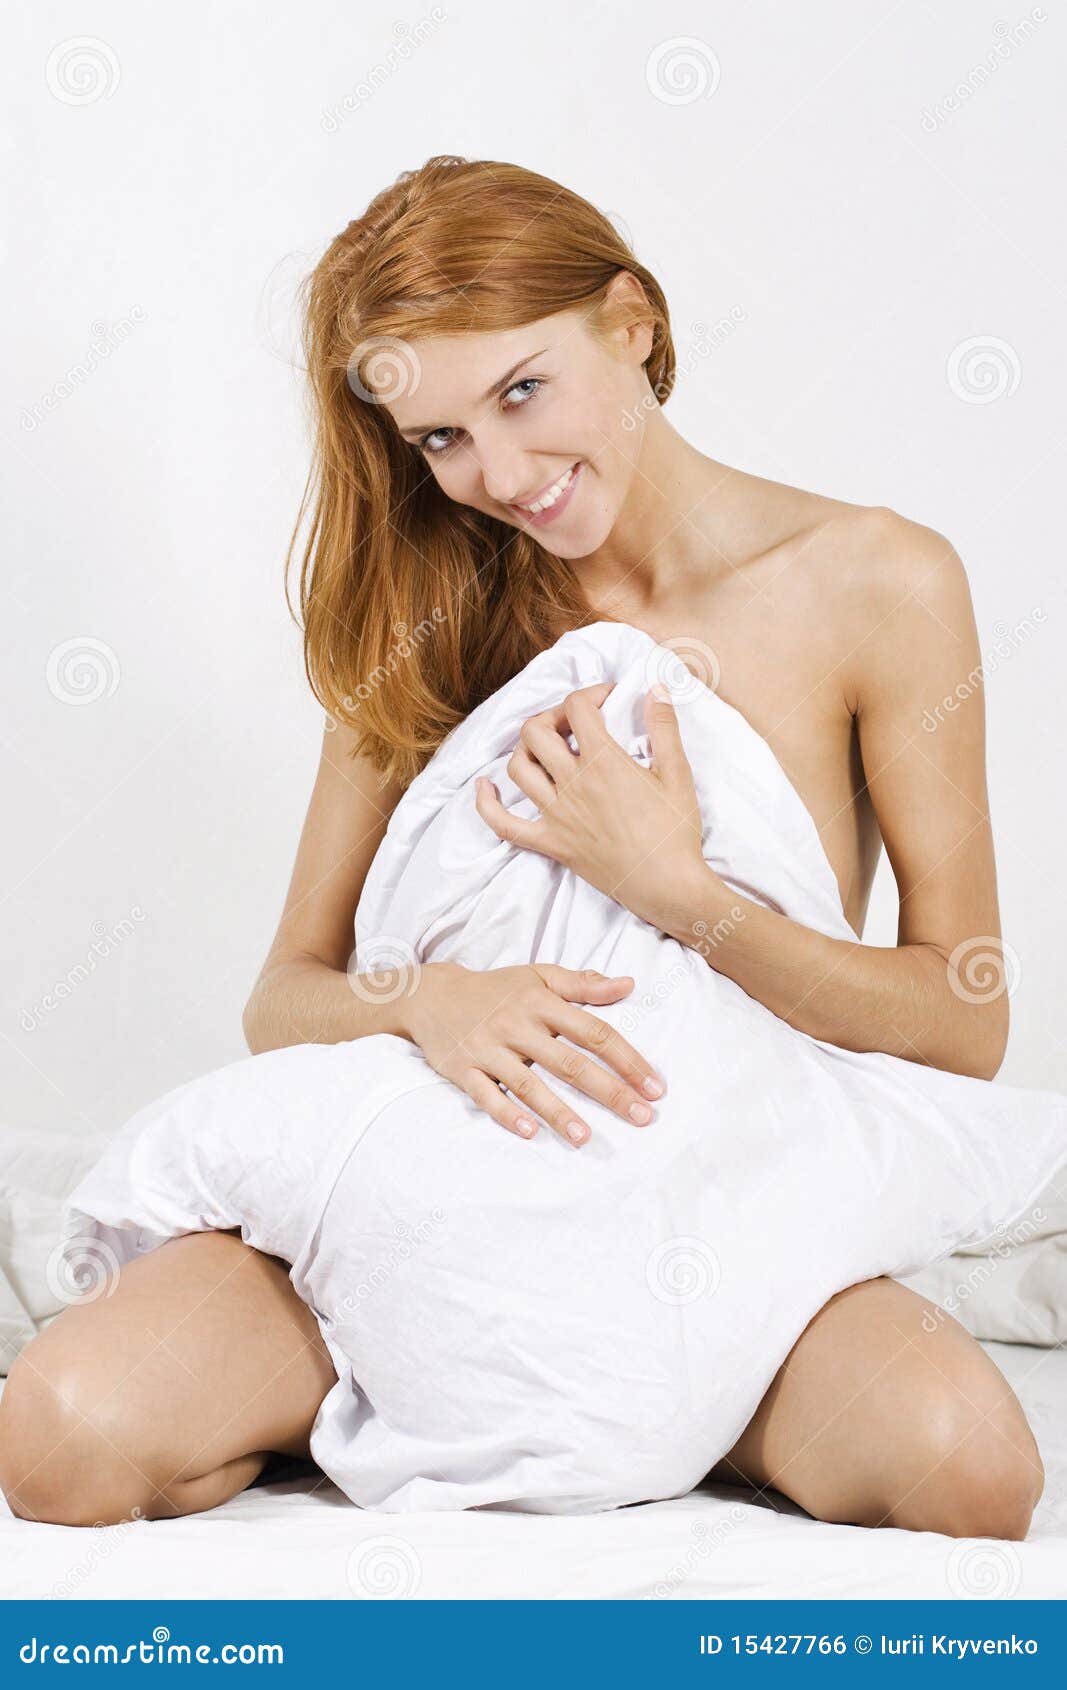 naked woman covered by the blanket